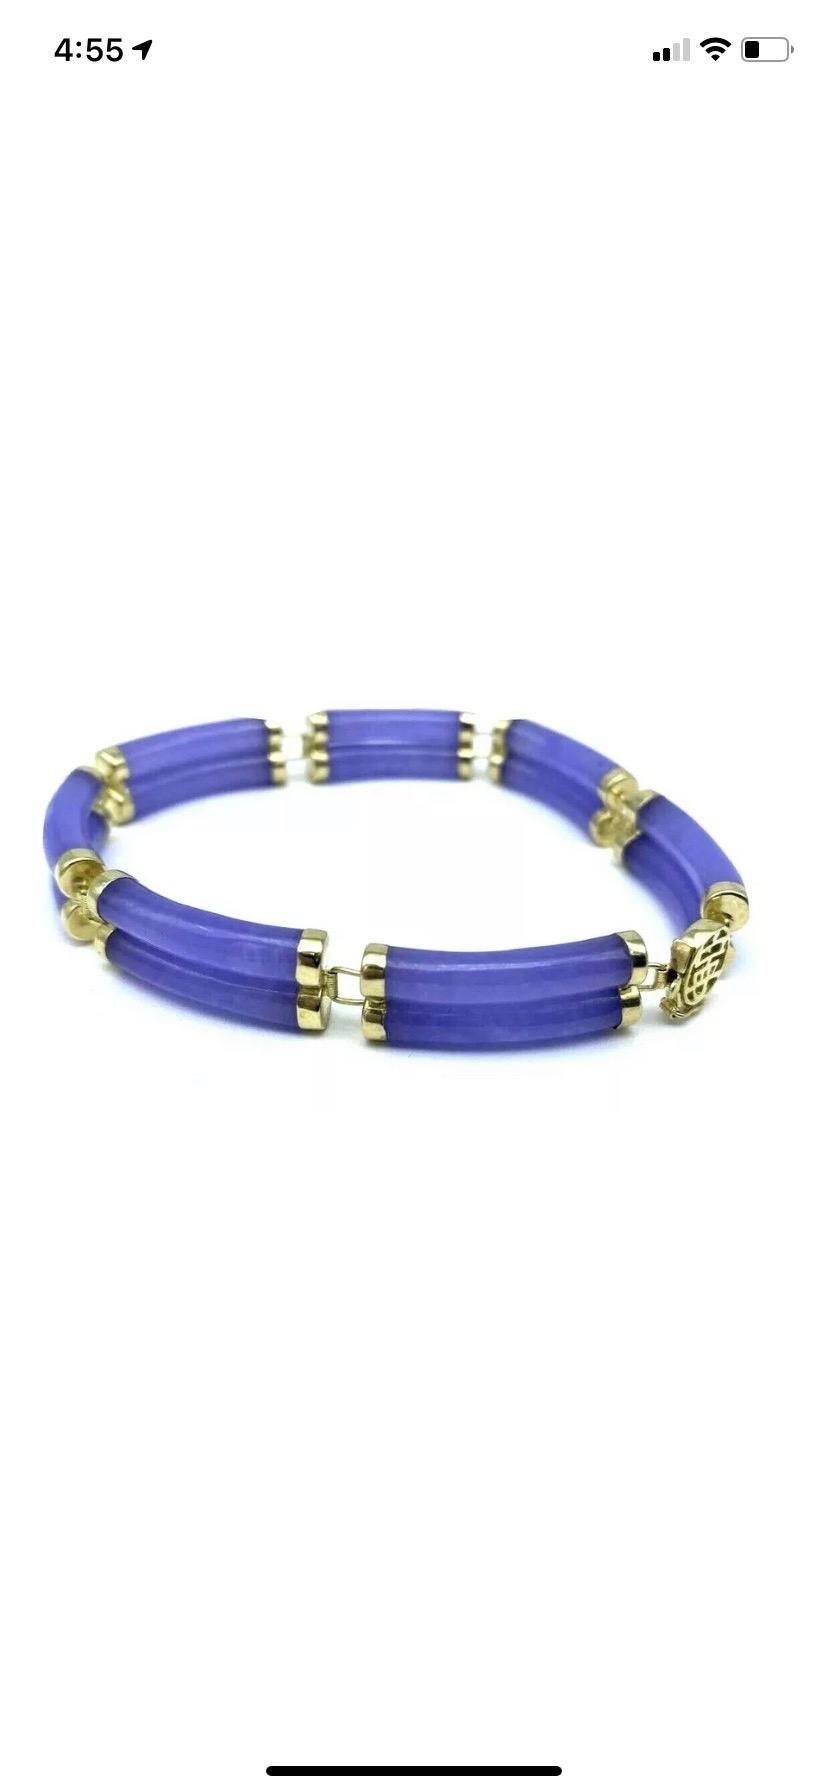 Lavender jade double row link style bracelet 
The beautiful Jade color is natural purple.

14 Carat yellow gold caps and clasp. The length is 8 inches. 

Excellent brand new condition set in rich colored 14 karat yellow gold.

GIA Gemologist